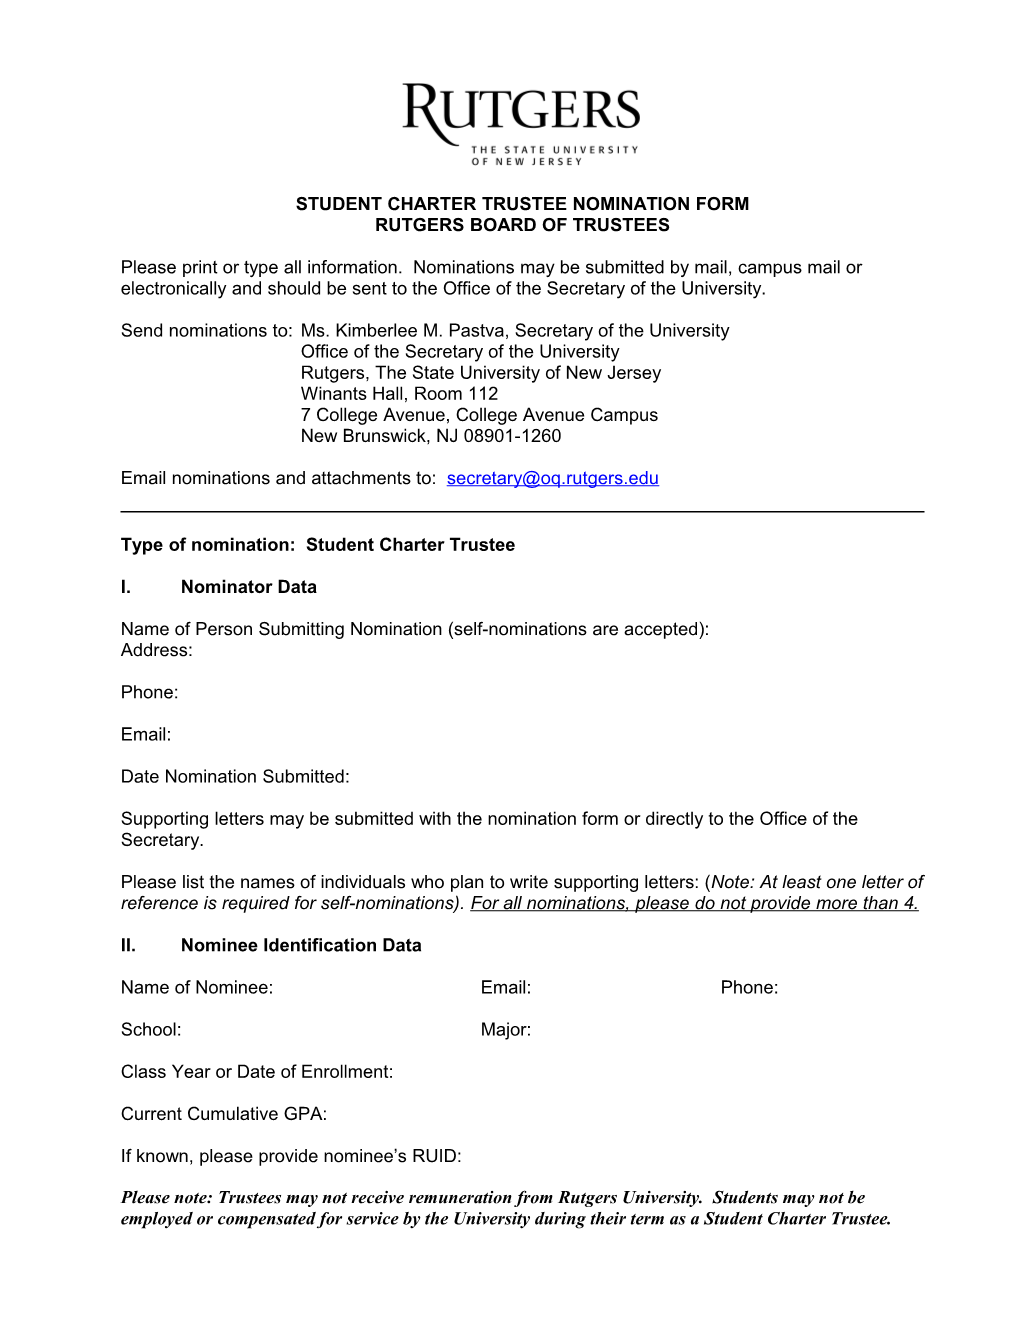 Student Charter Trustee Nomination Form (00007889-2)